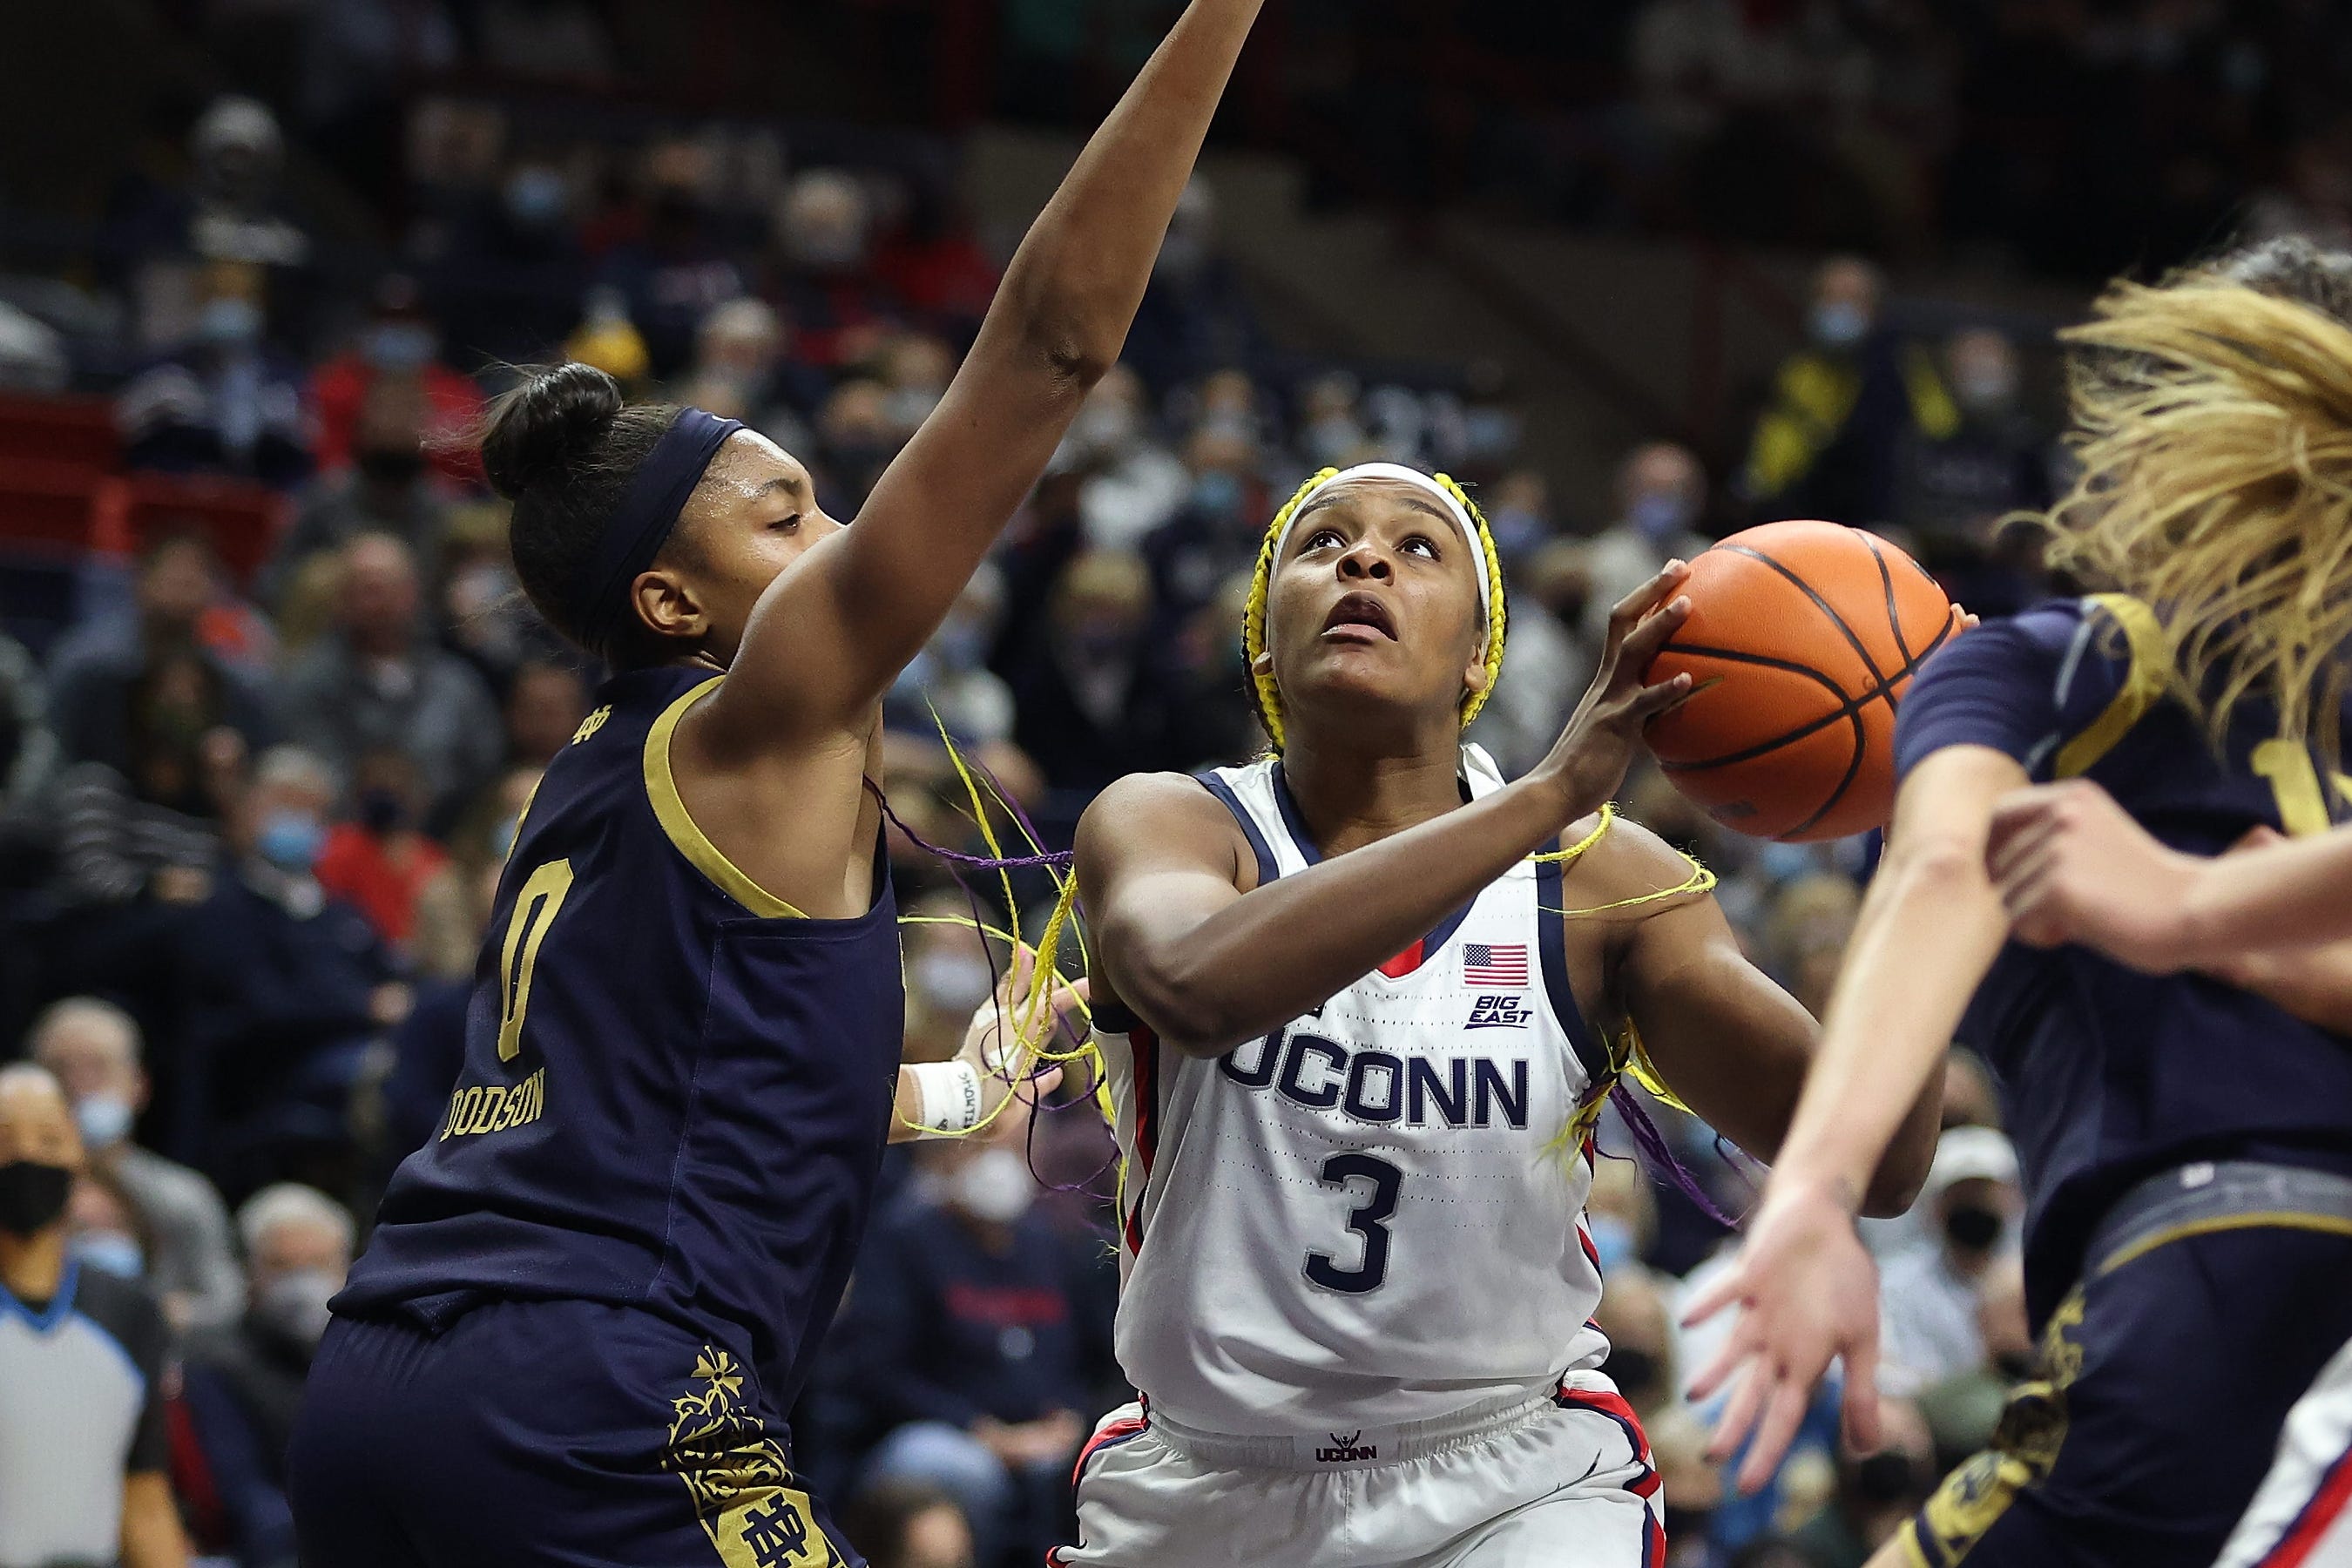 Paige Bueckers Game Winner Vs Gamecocks Shows Brilliance of UConn Star